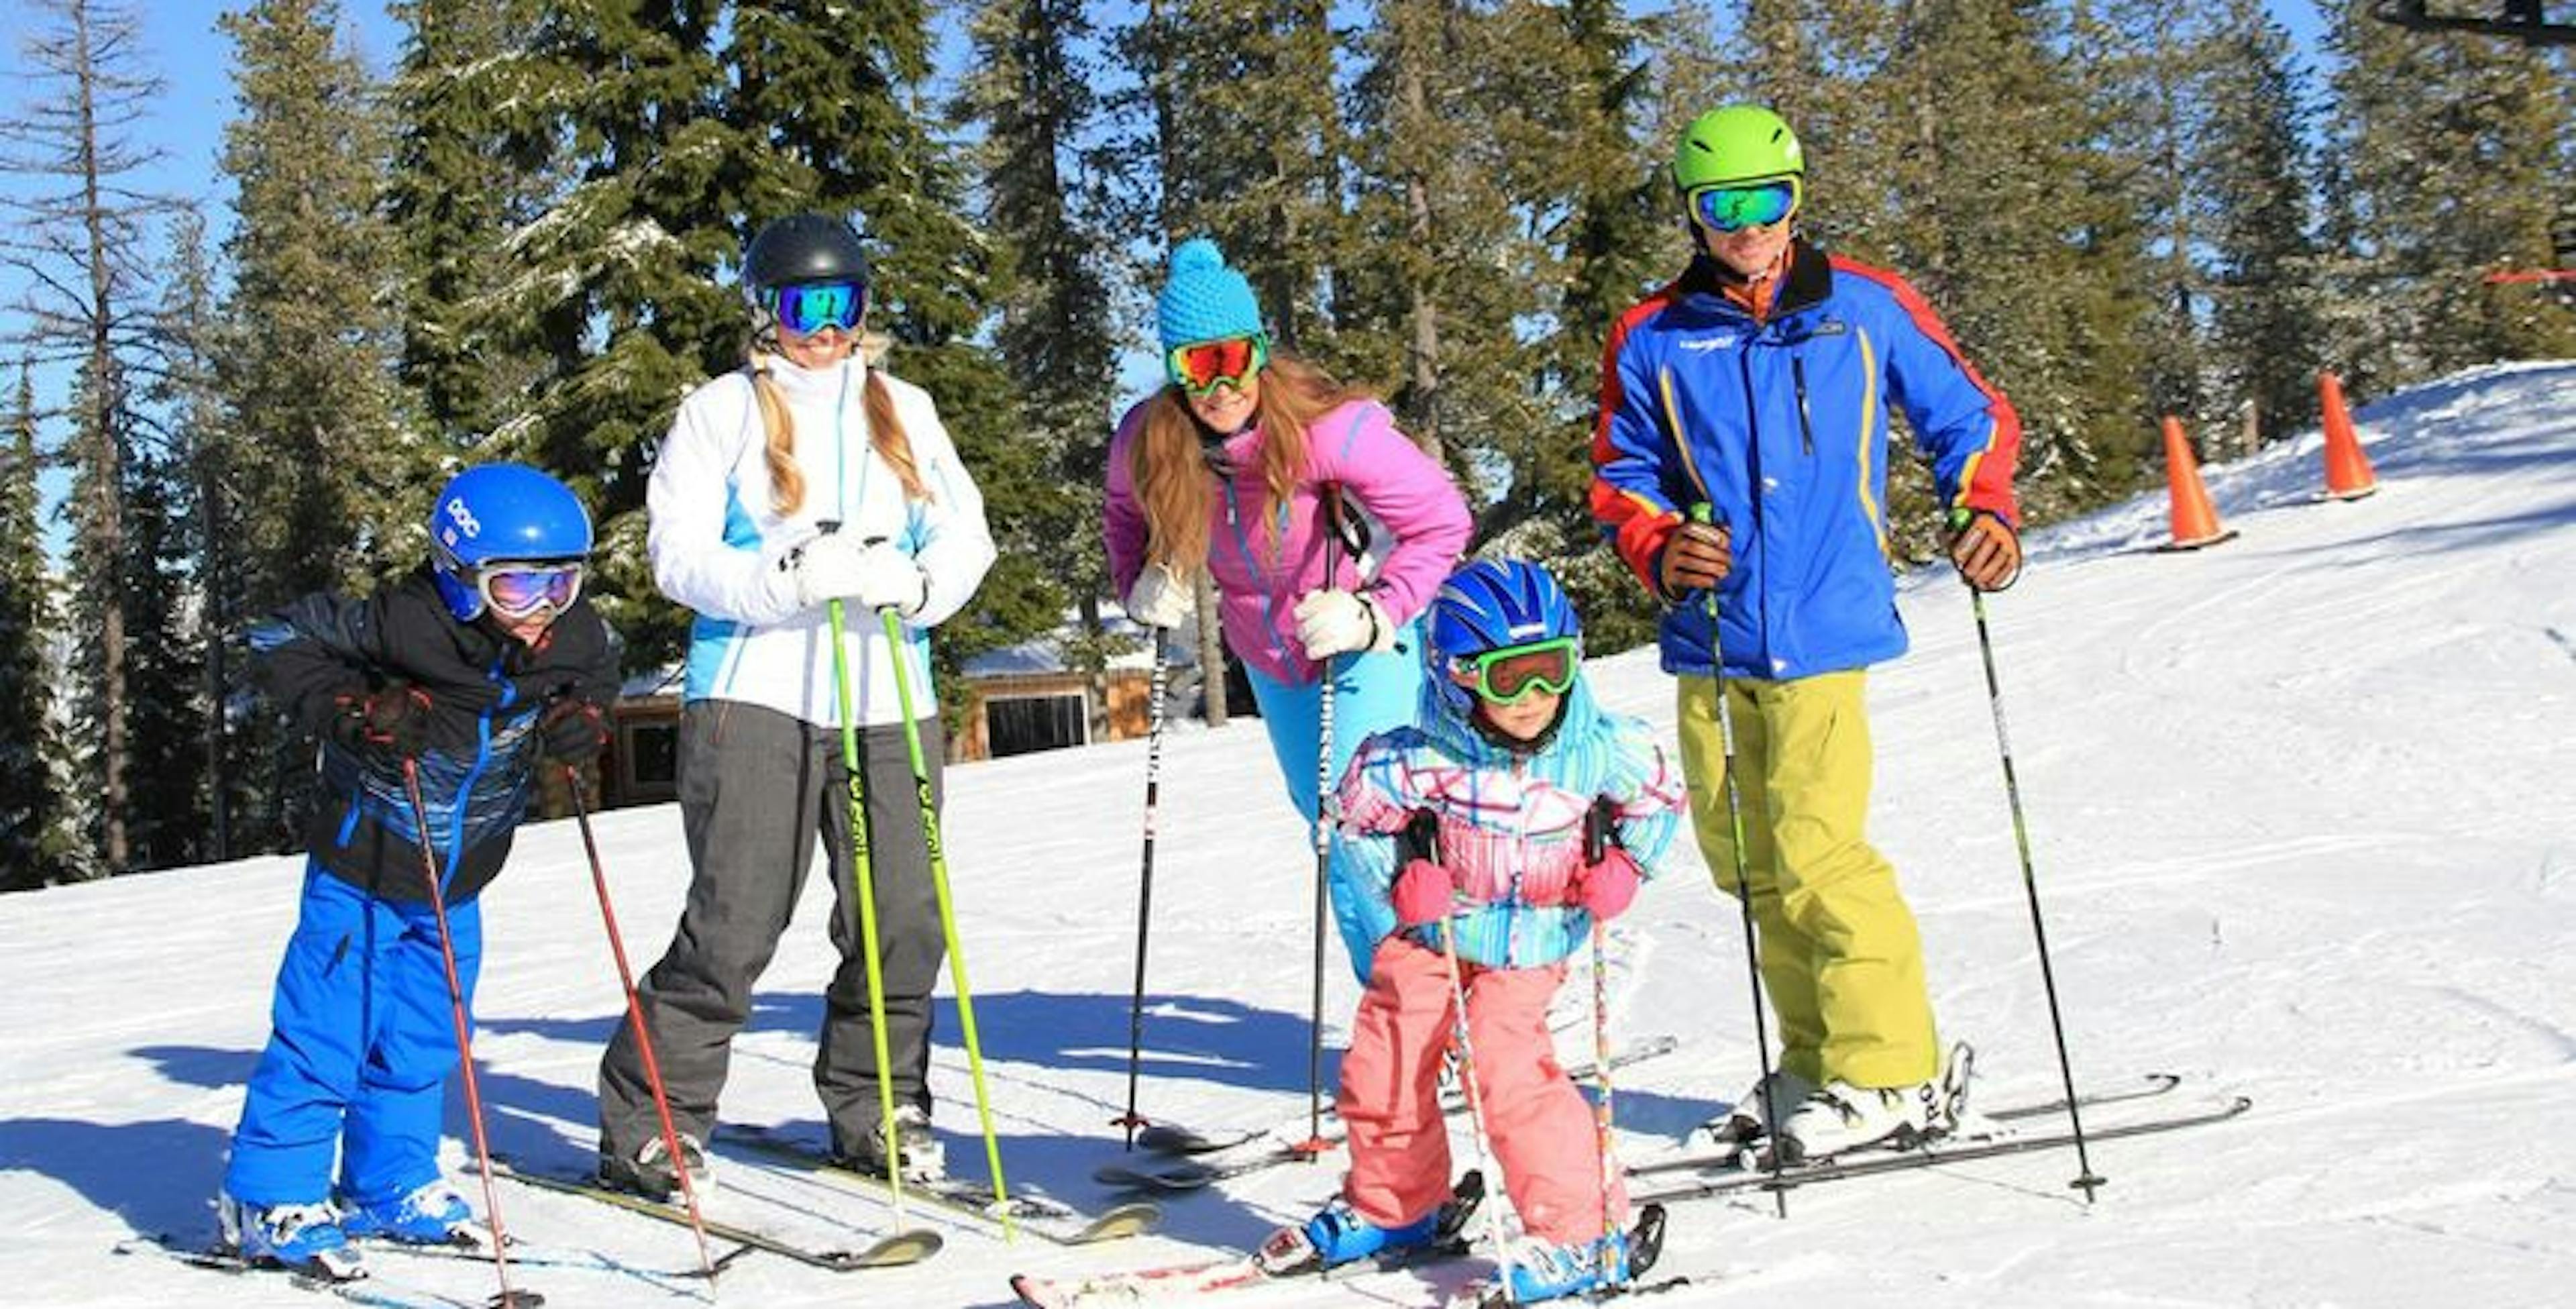 Skiing with family